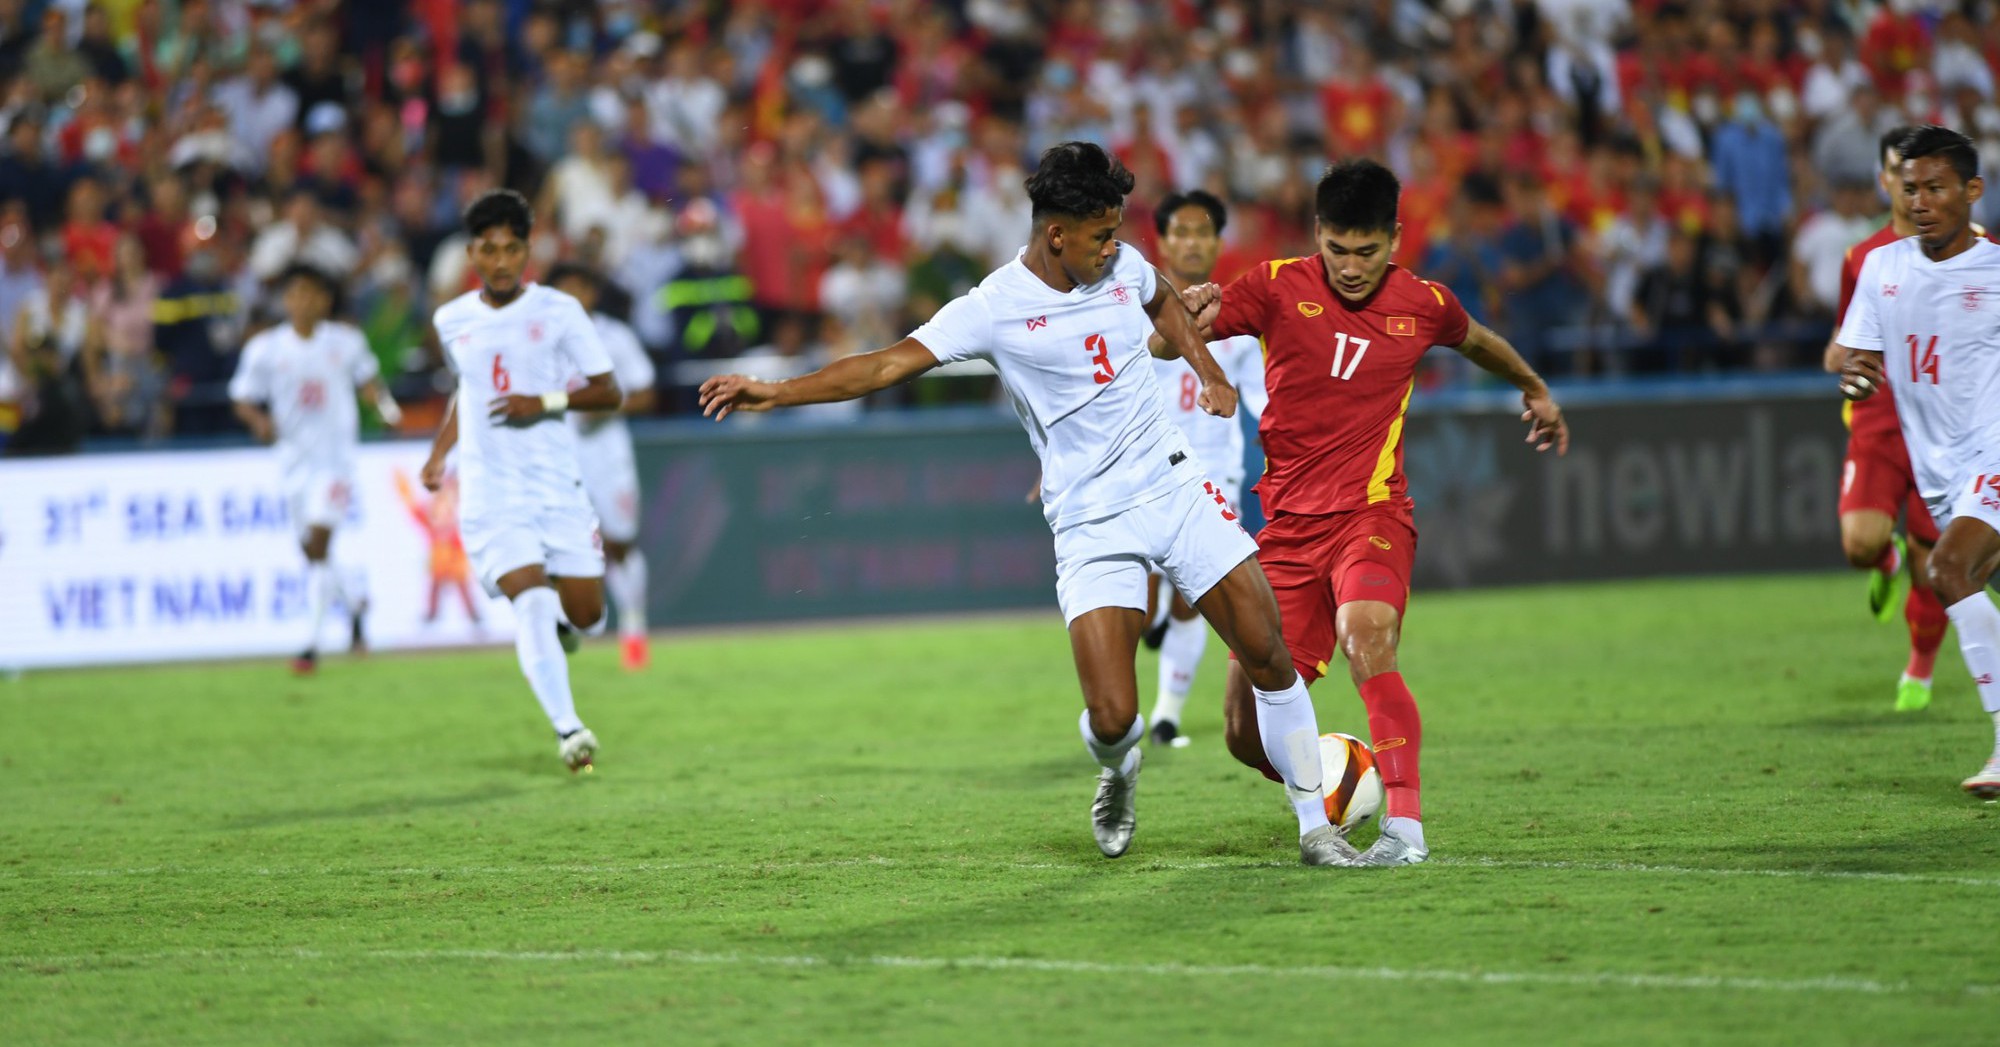 Coach Park Hang-seo affirmed that he was not satisfied with U23 Vietnam after the victory against U23 Myanmar